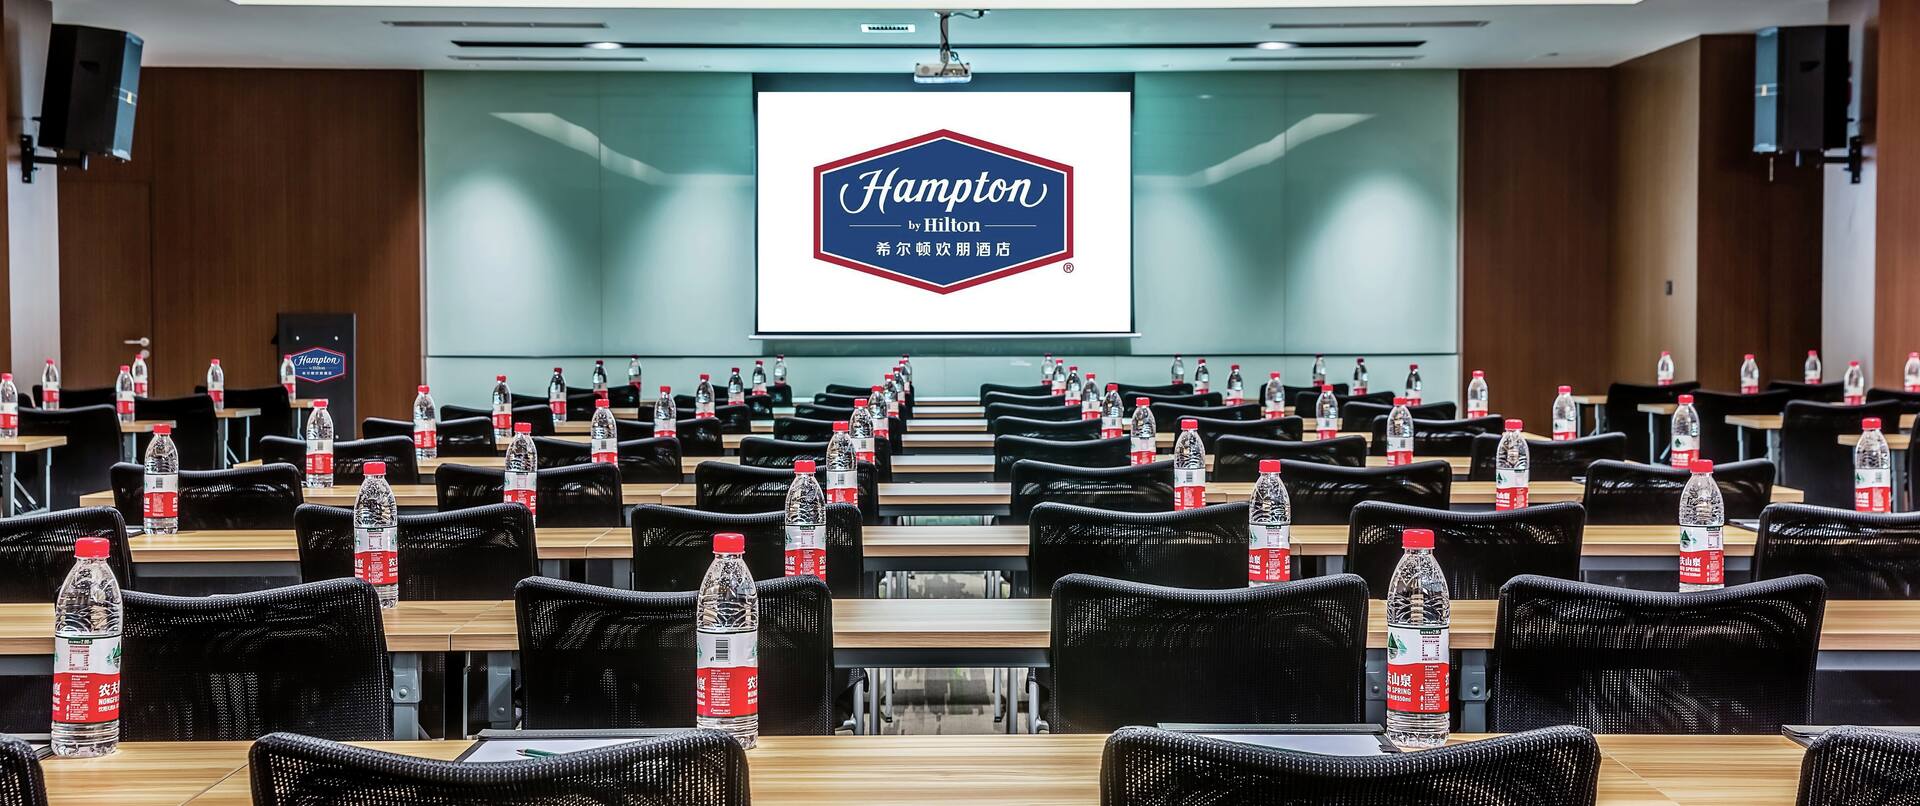 Large meeting room, rows of tables, chairs, large screen